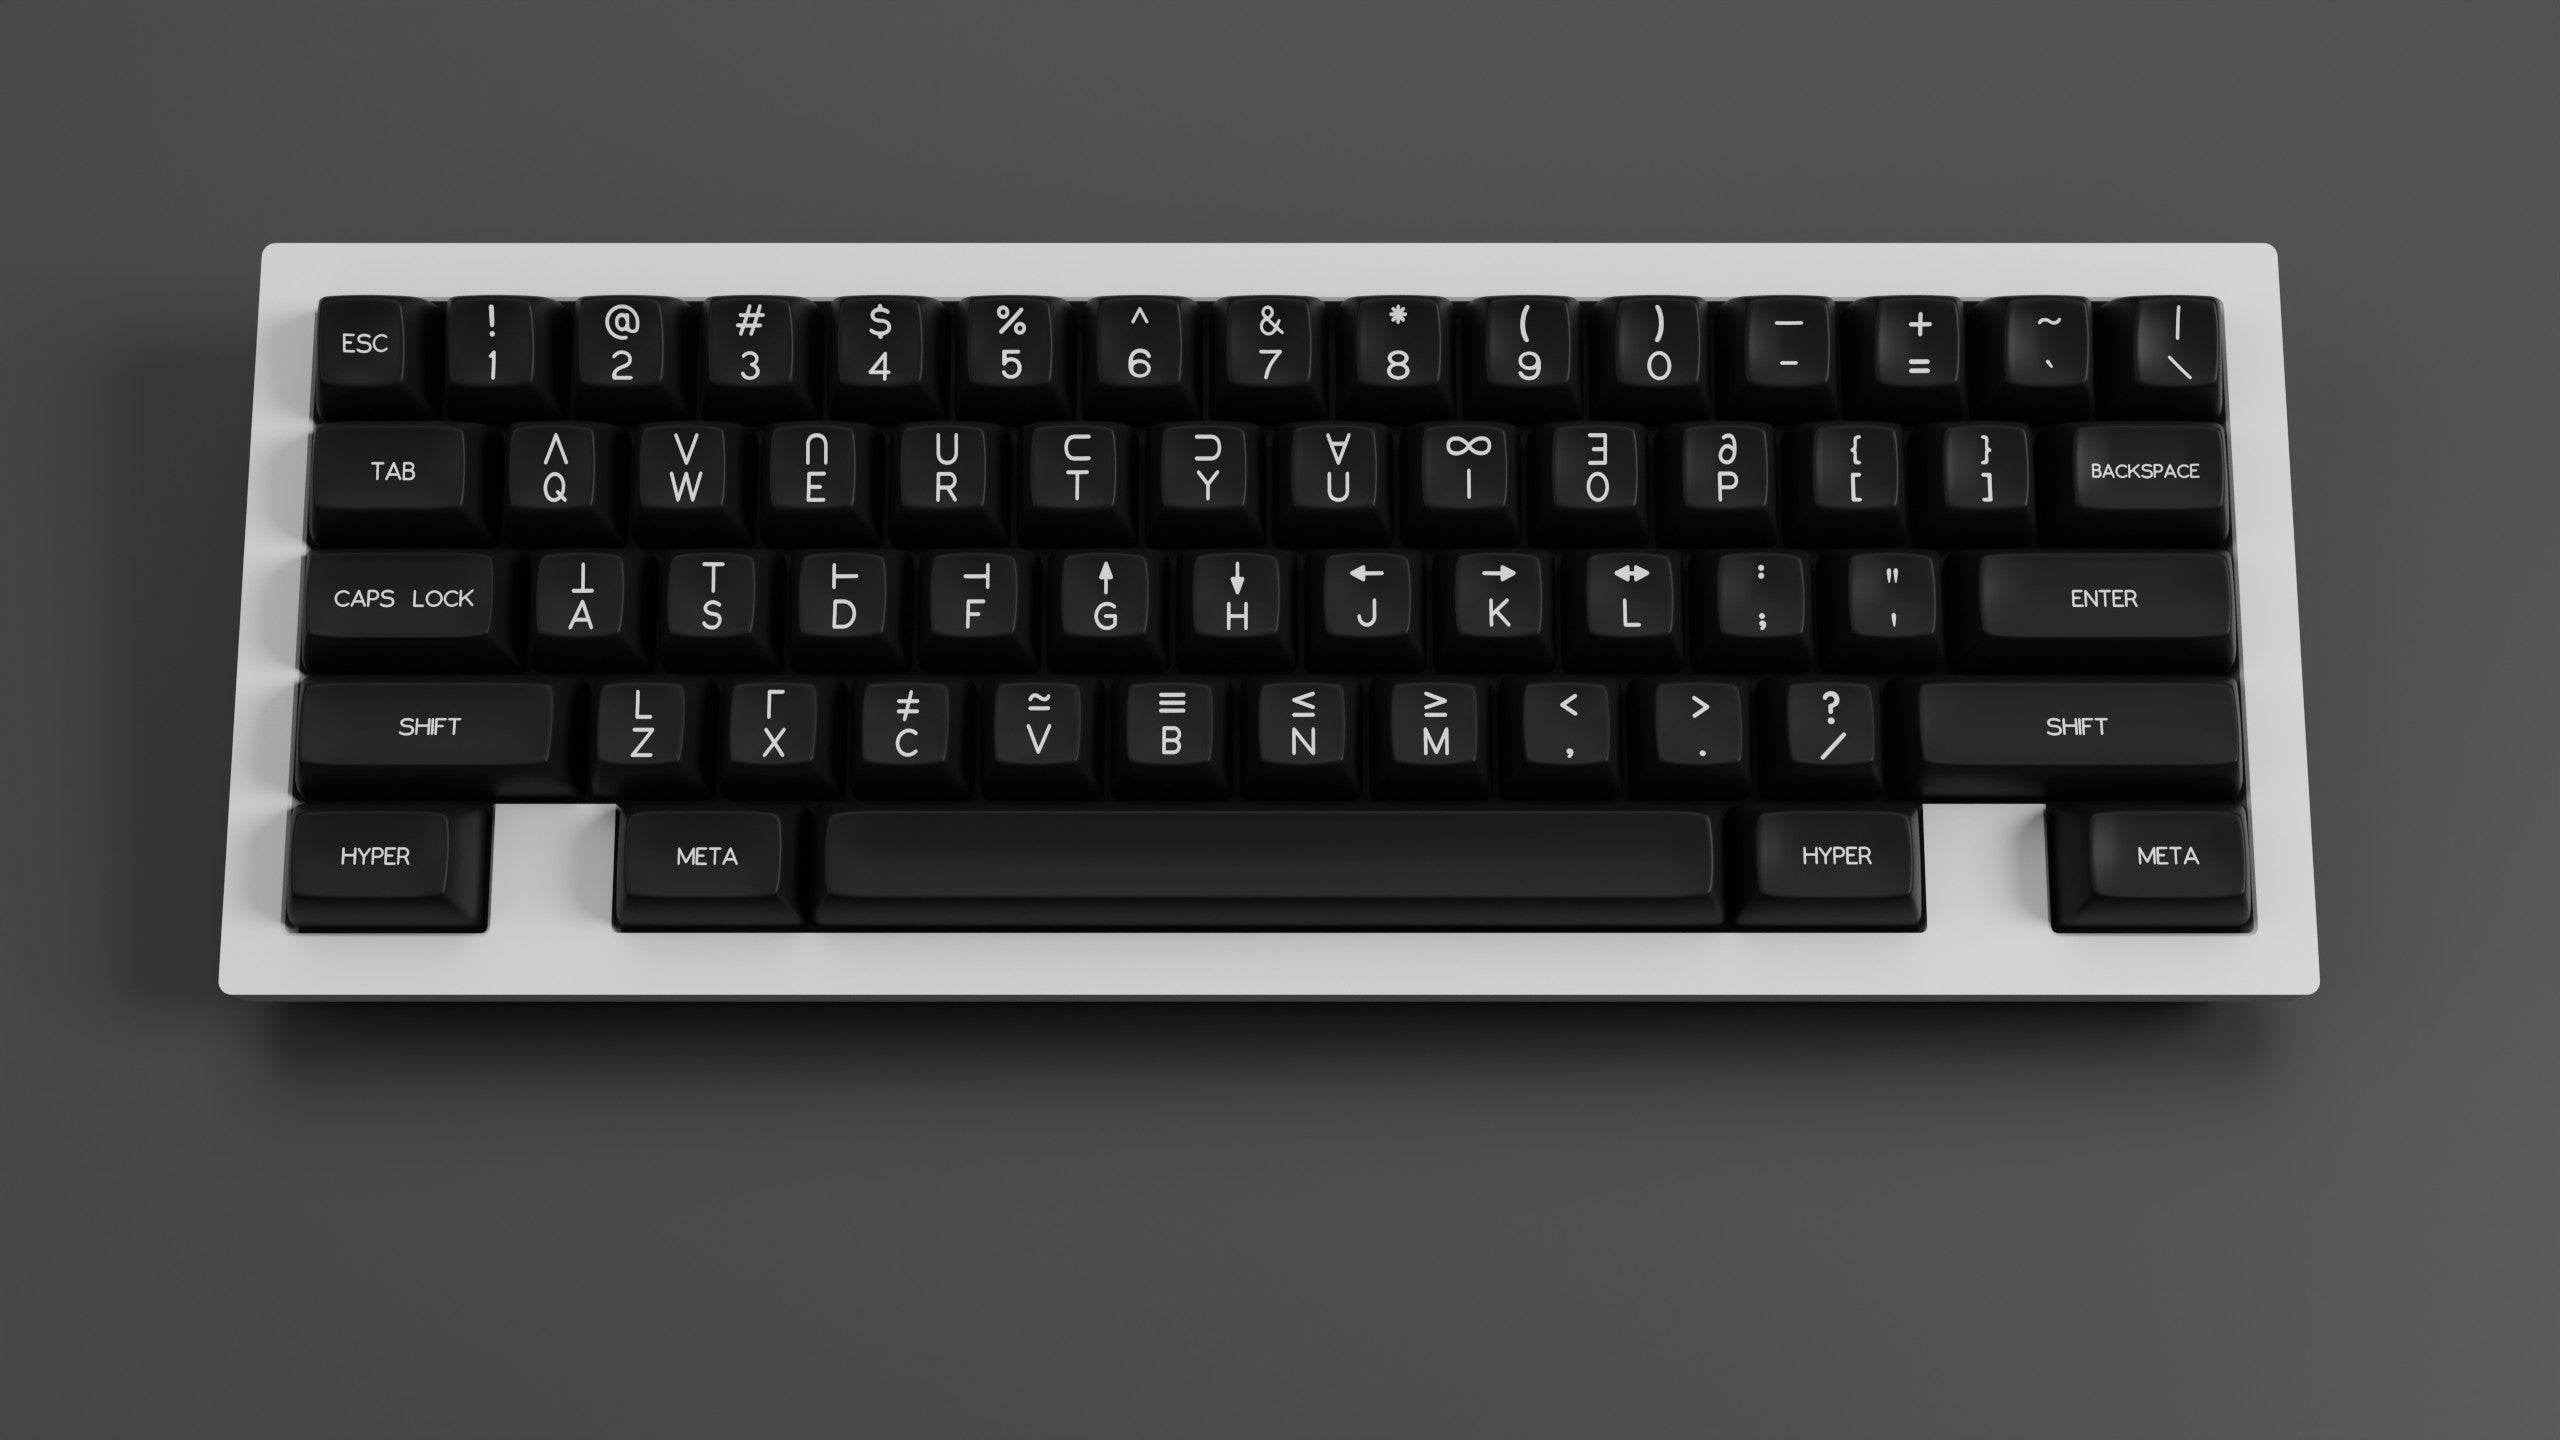 [Group buy] SP SA Spectra-zFrontier